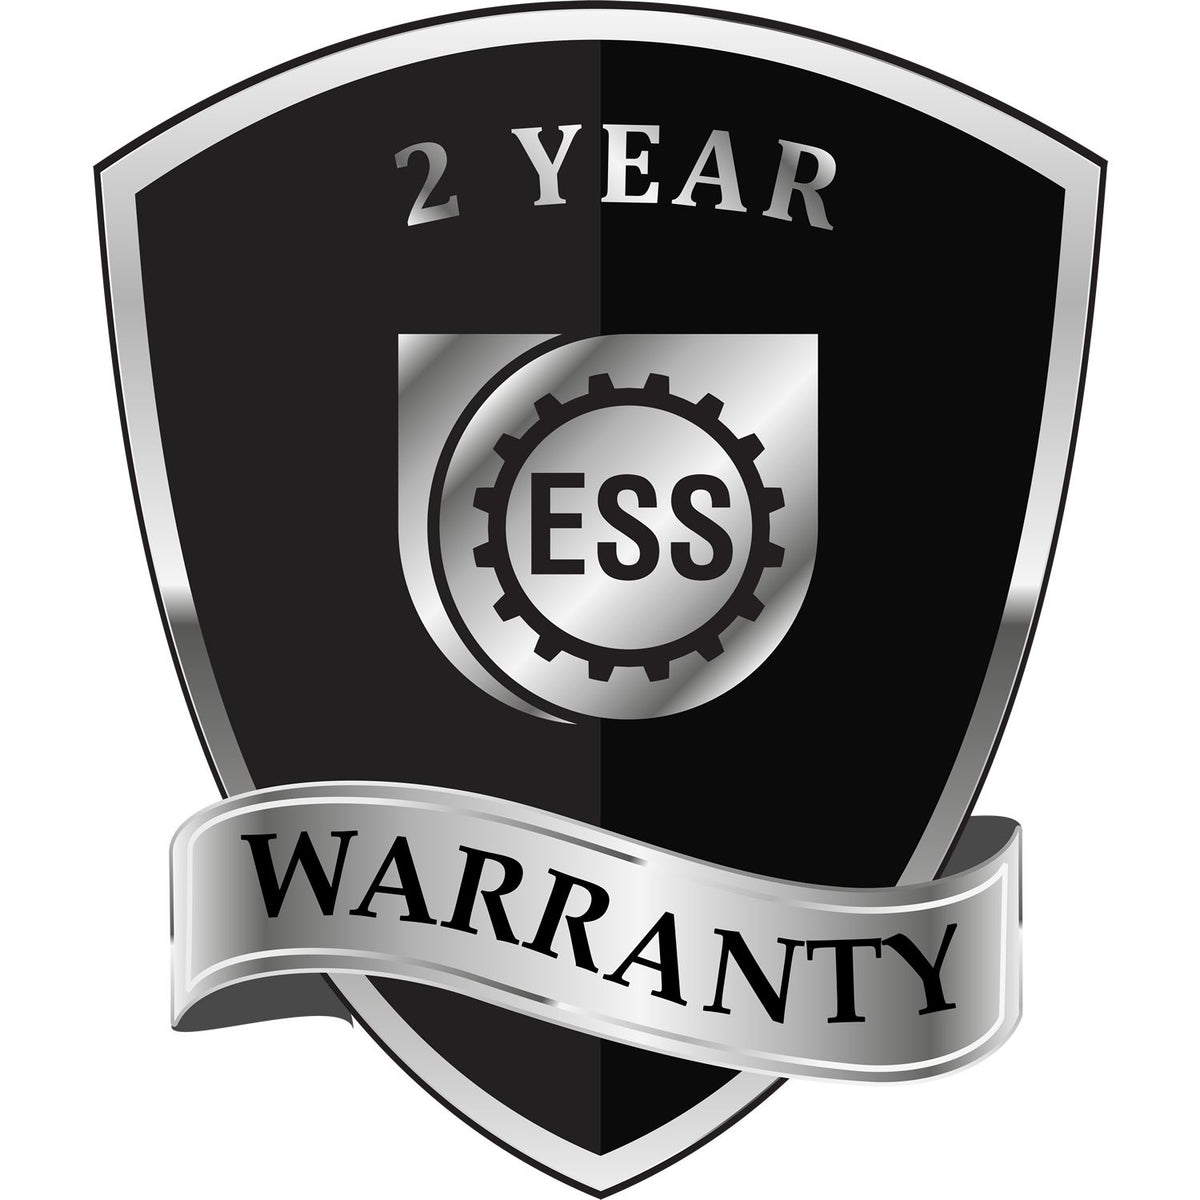 A black and silver badge or emblem showing warranty information for the Gift Iowa Landscape Architect Seal